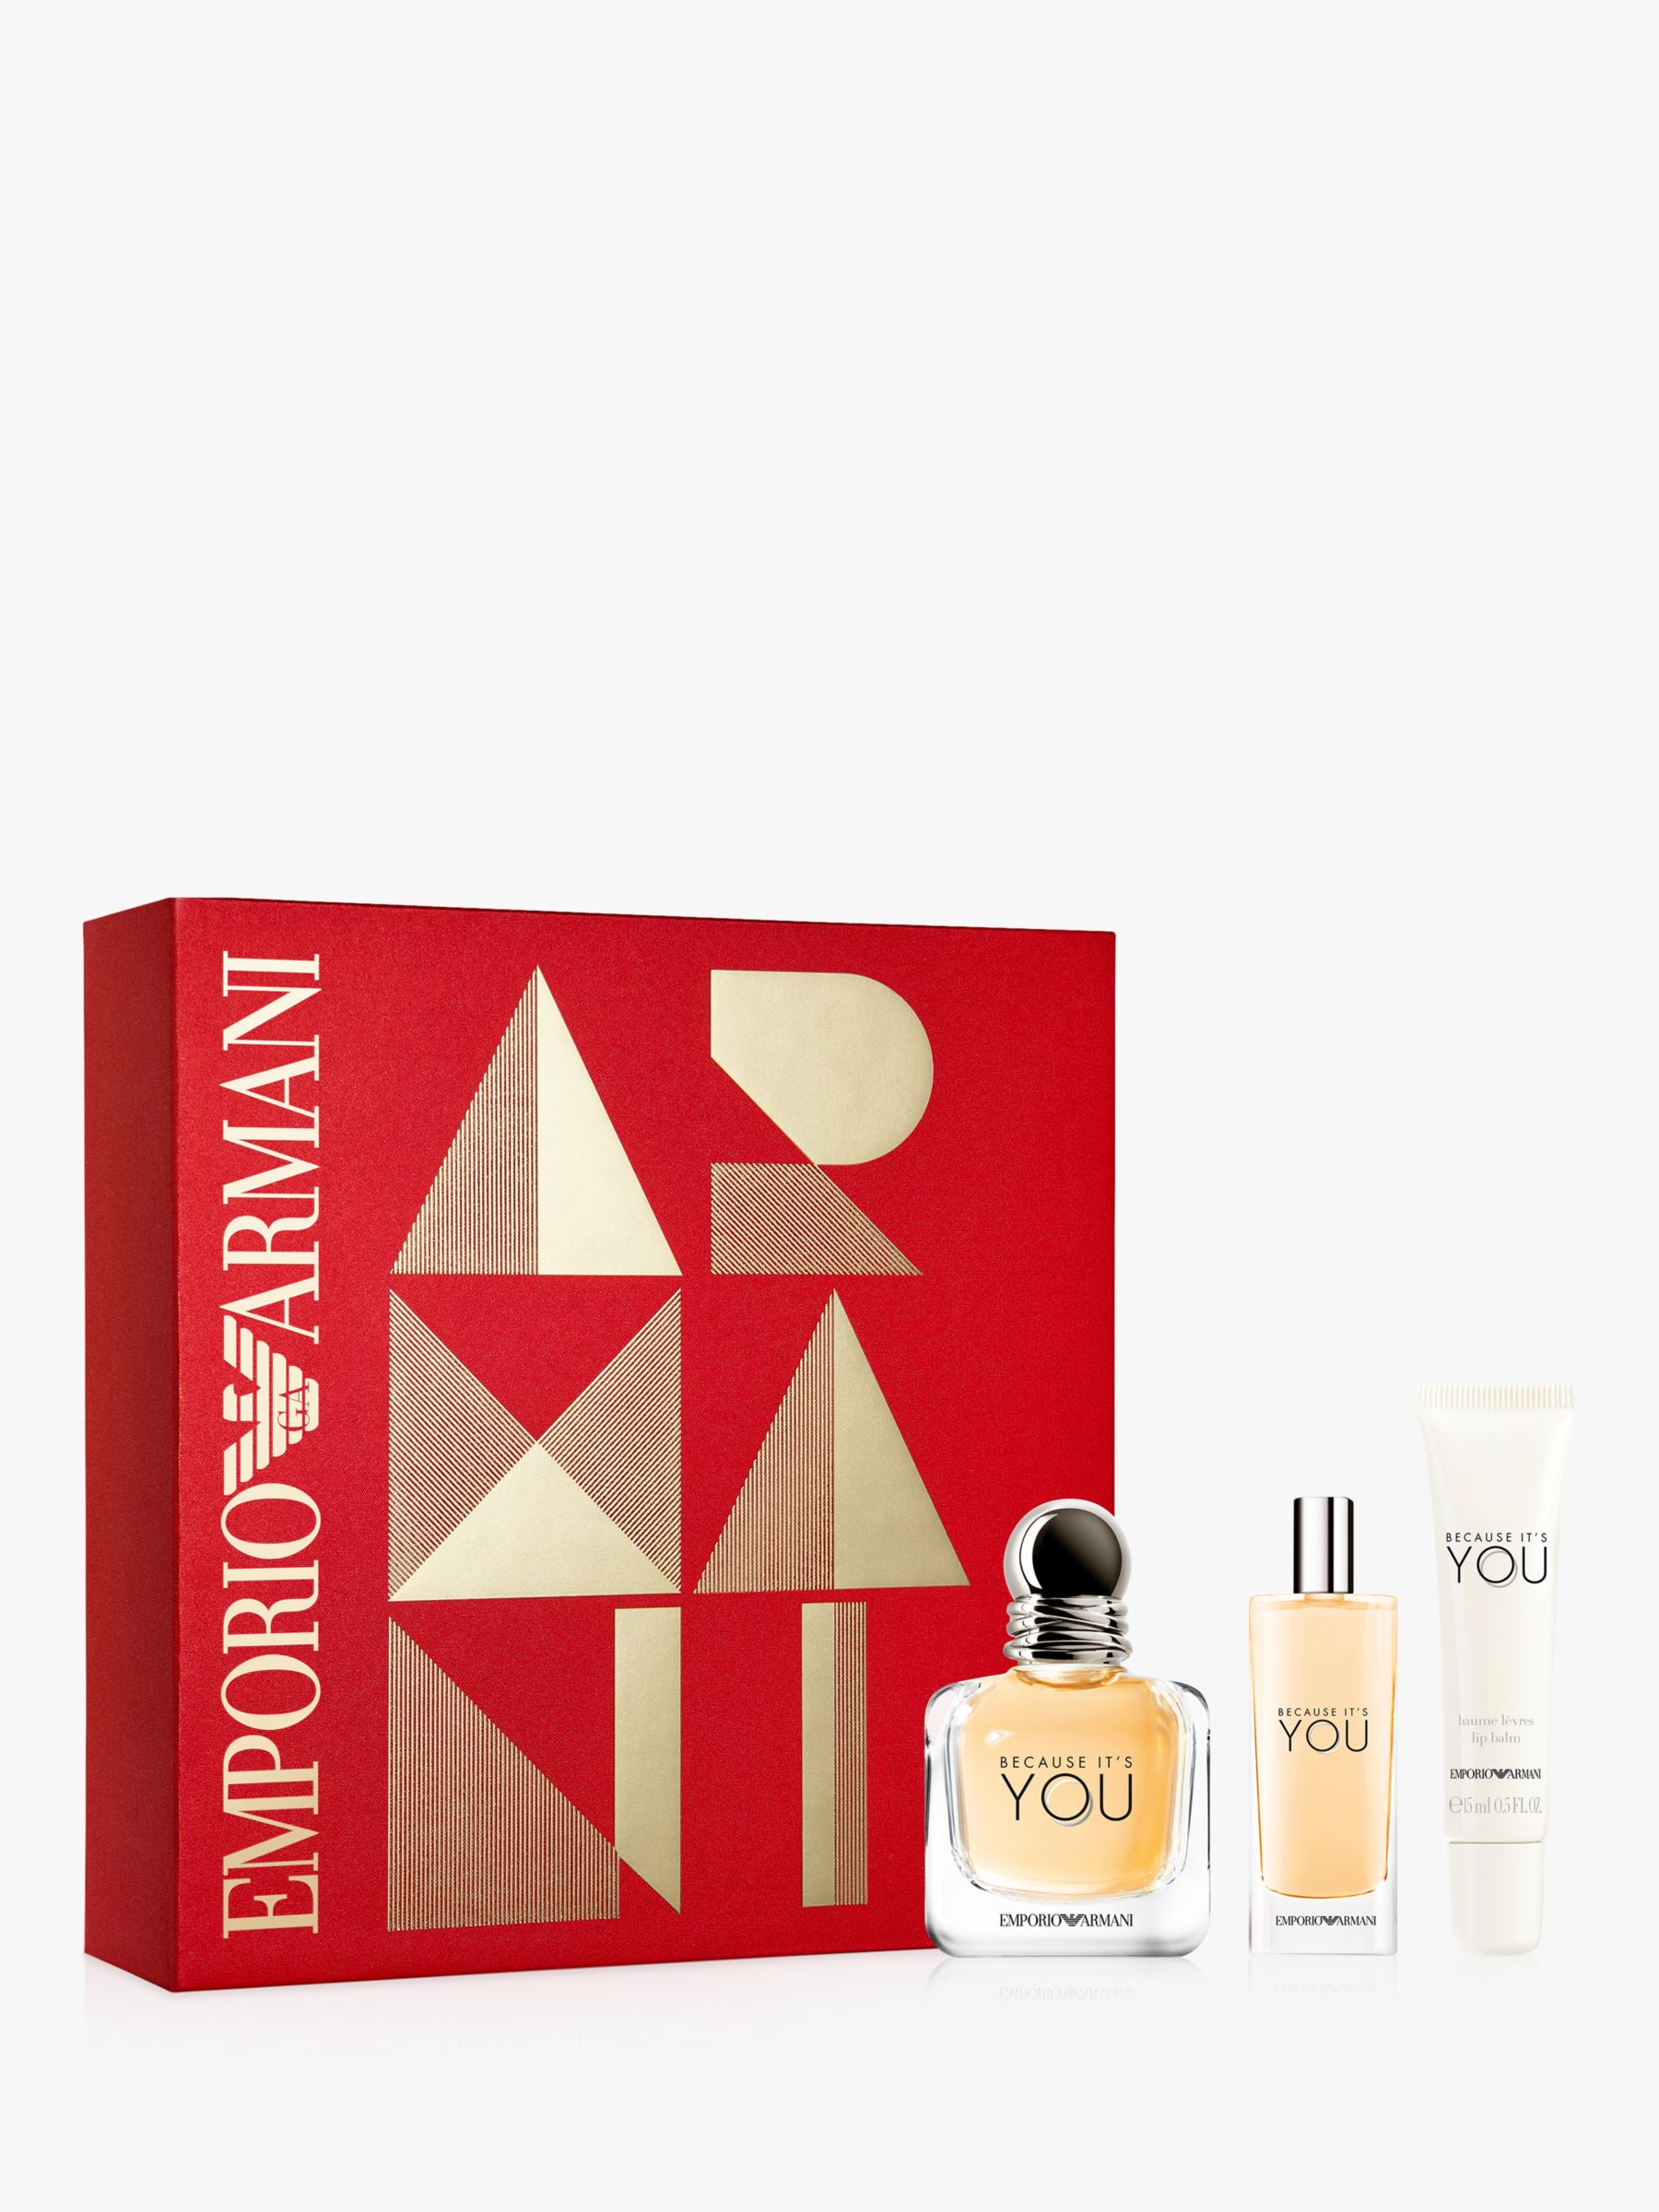 because it's you armani gift set